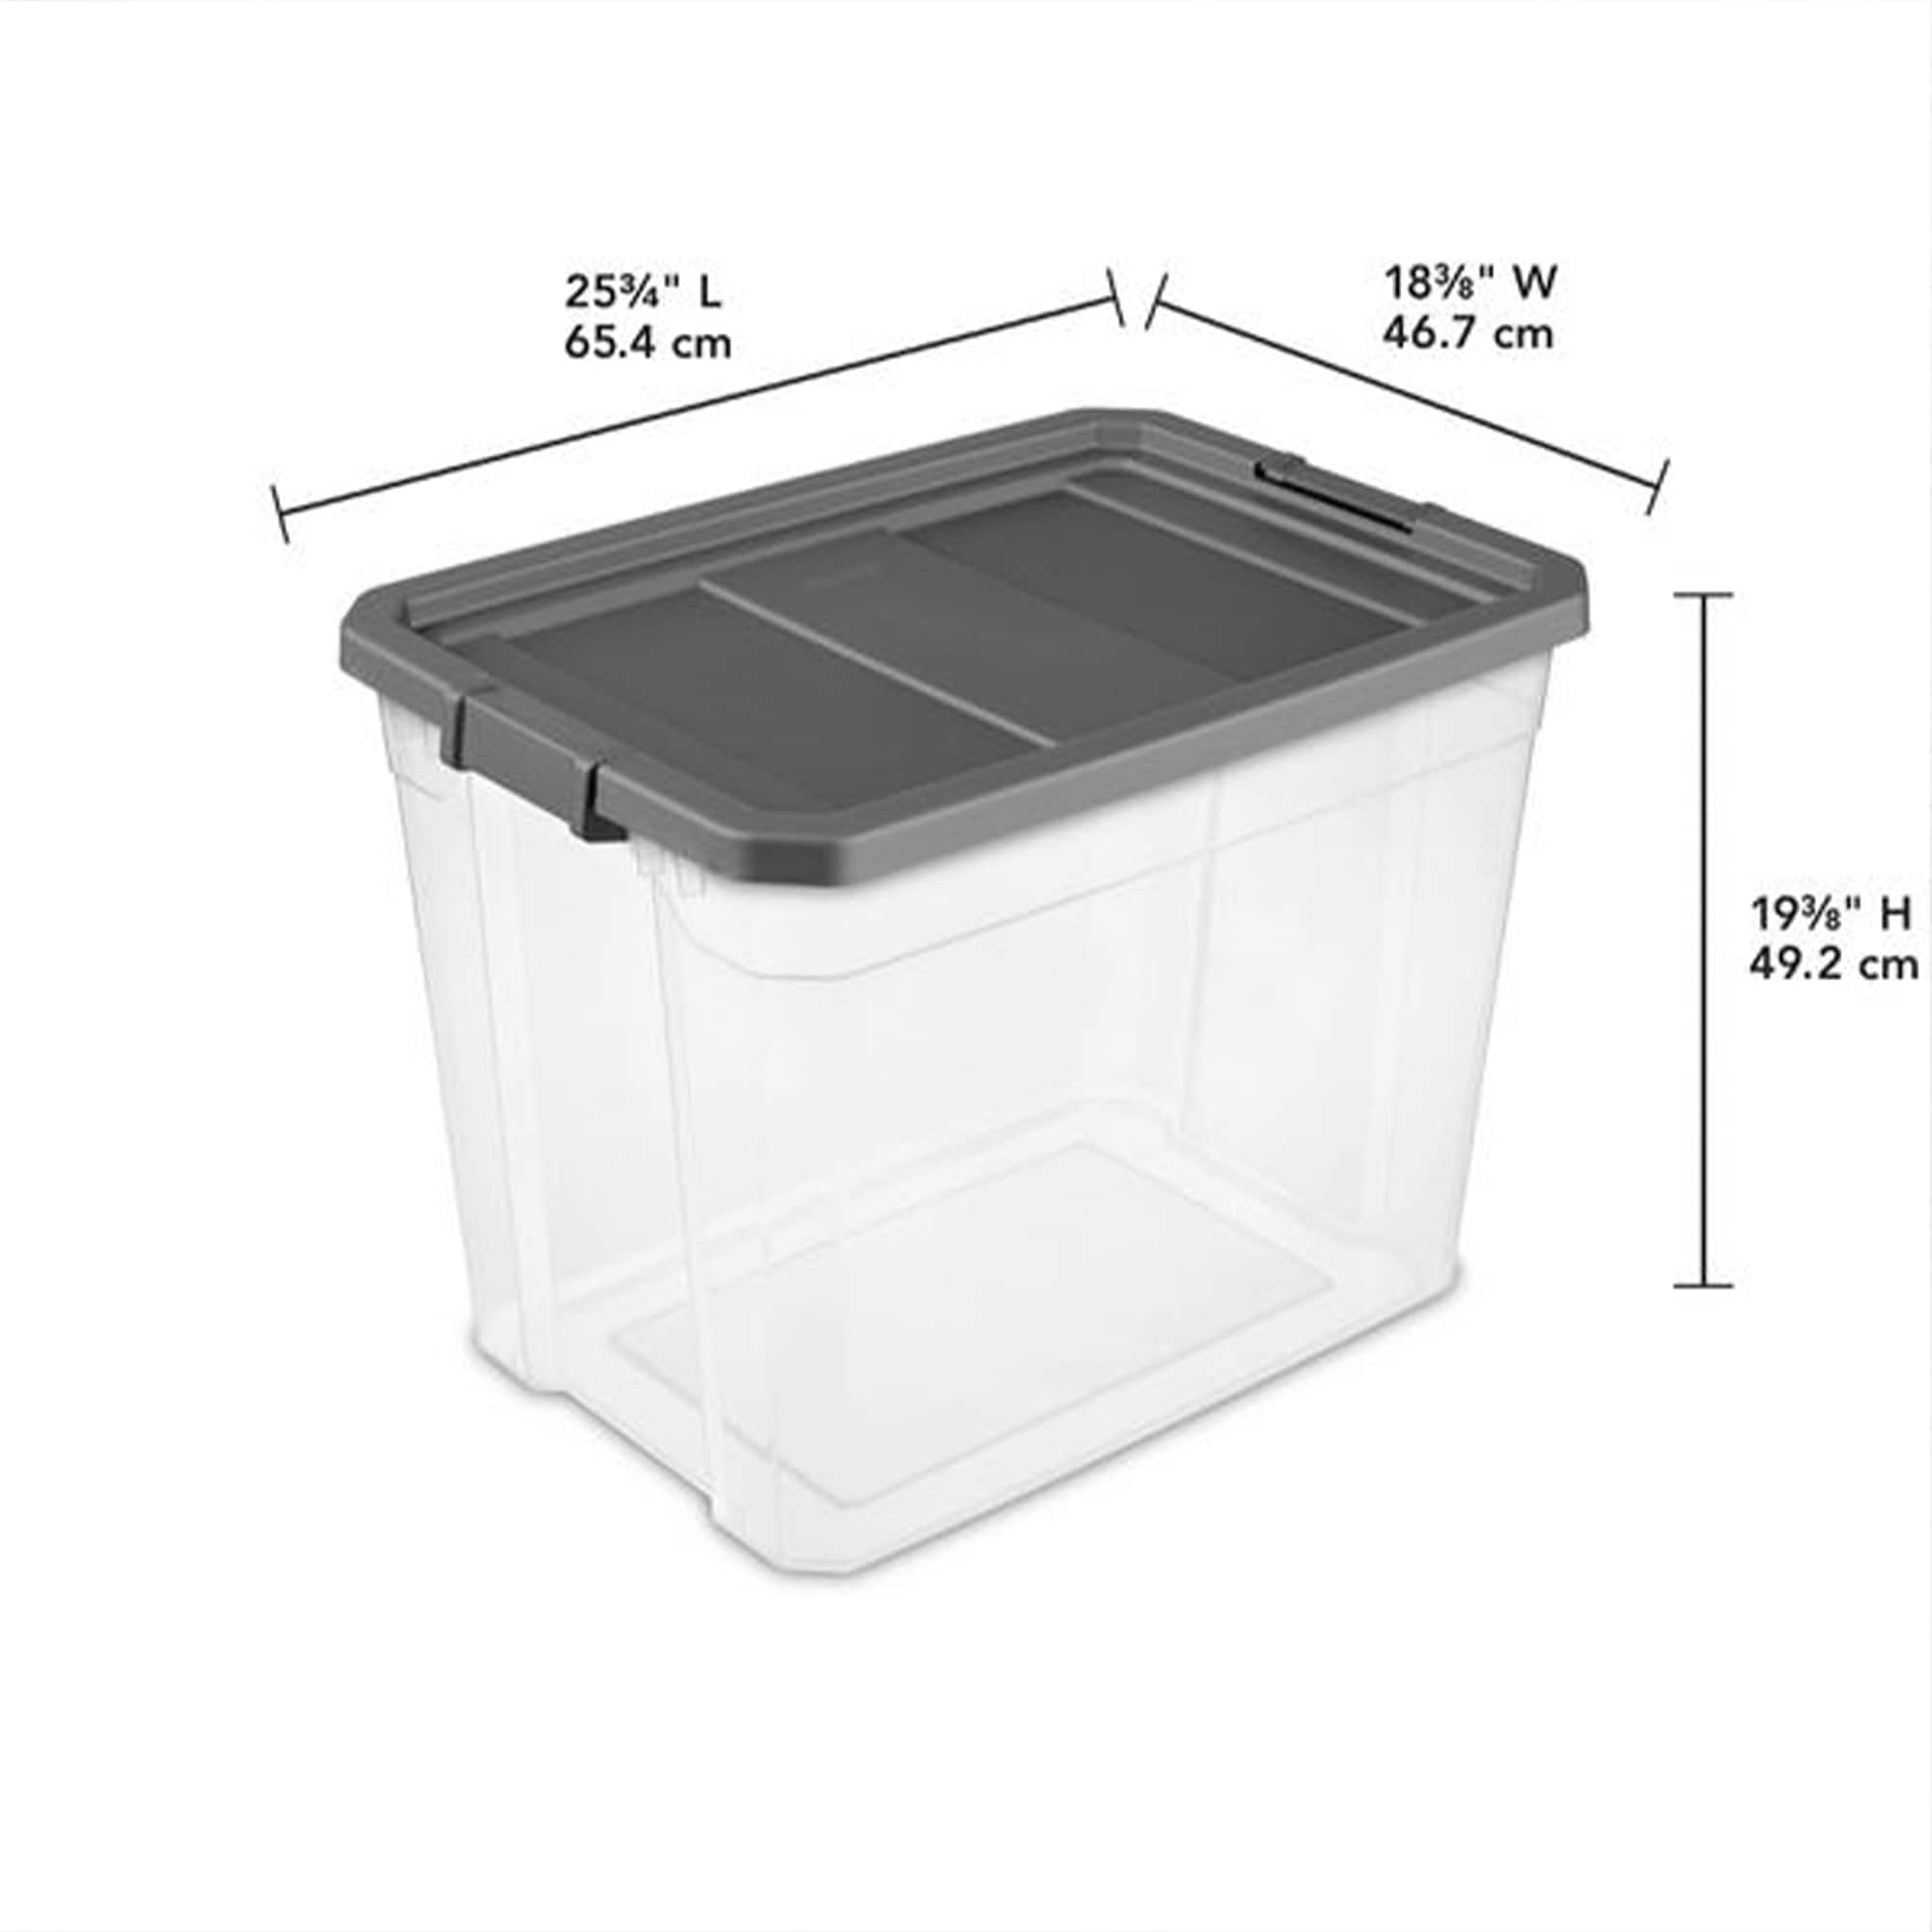 Commander 27-Gallon Storage Totes, $8.98 at Lowe's